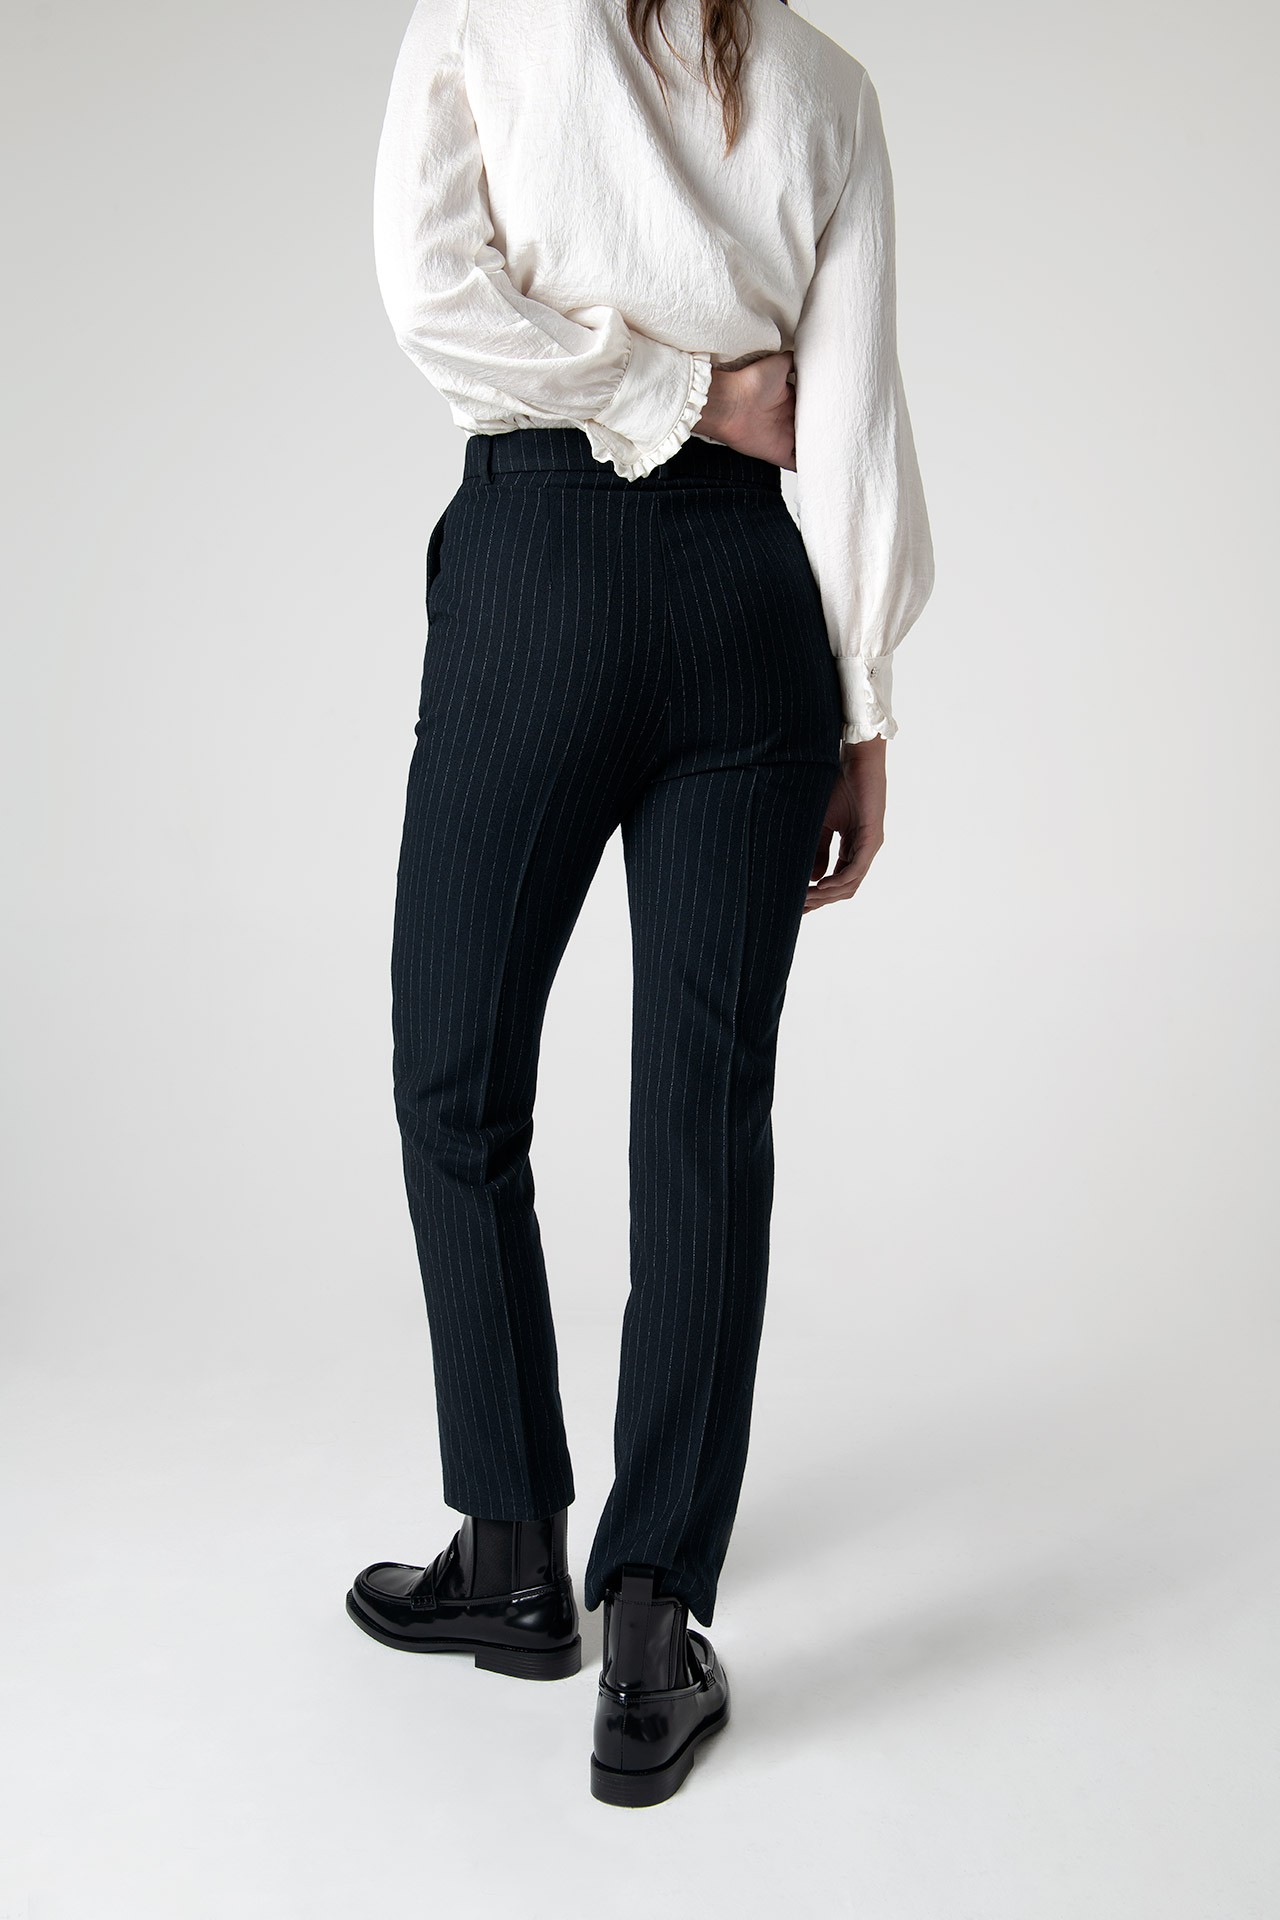 Mary Lacy Slim Fit Trousers